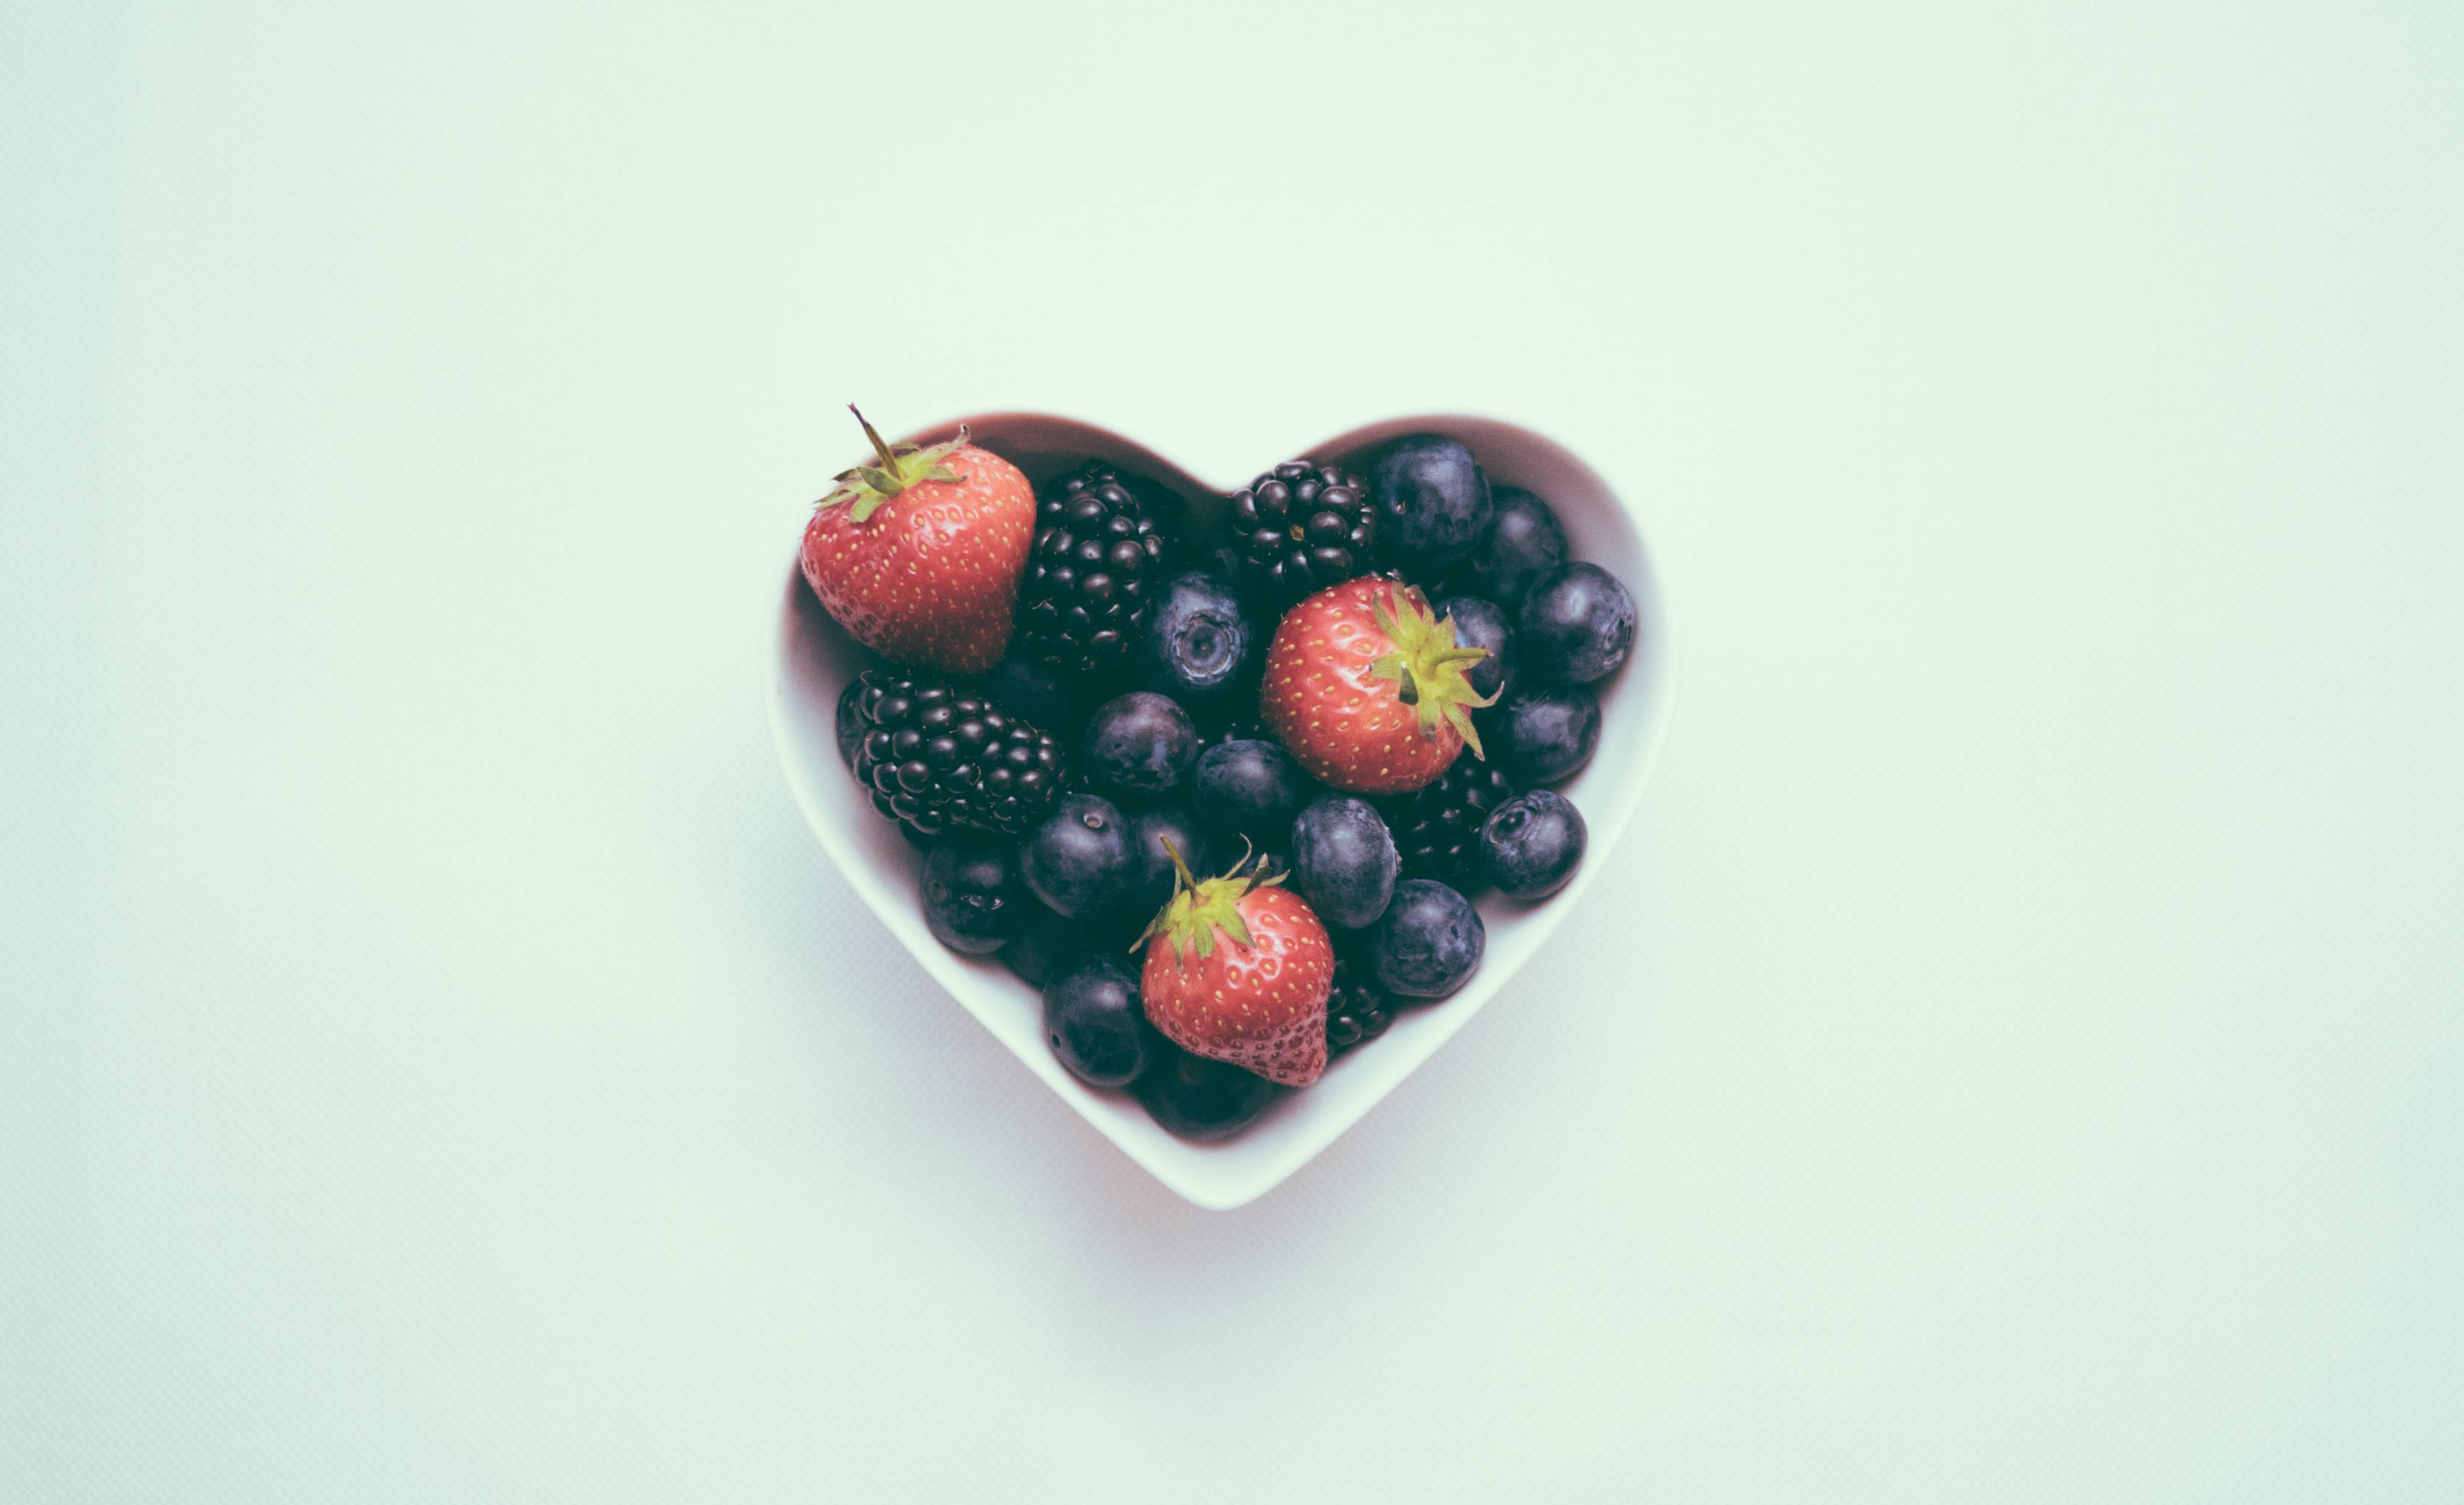 berries in a heart-shaped bowl